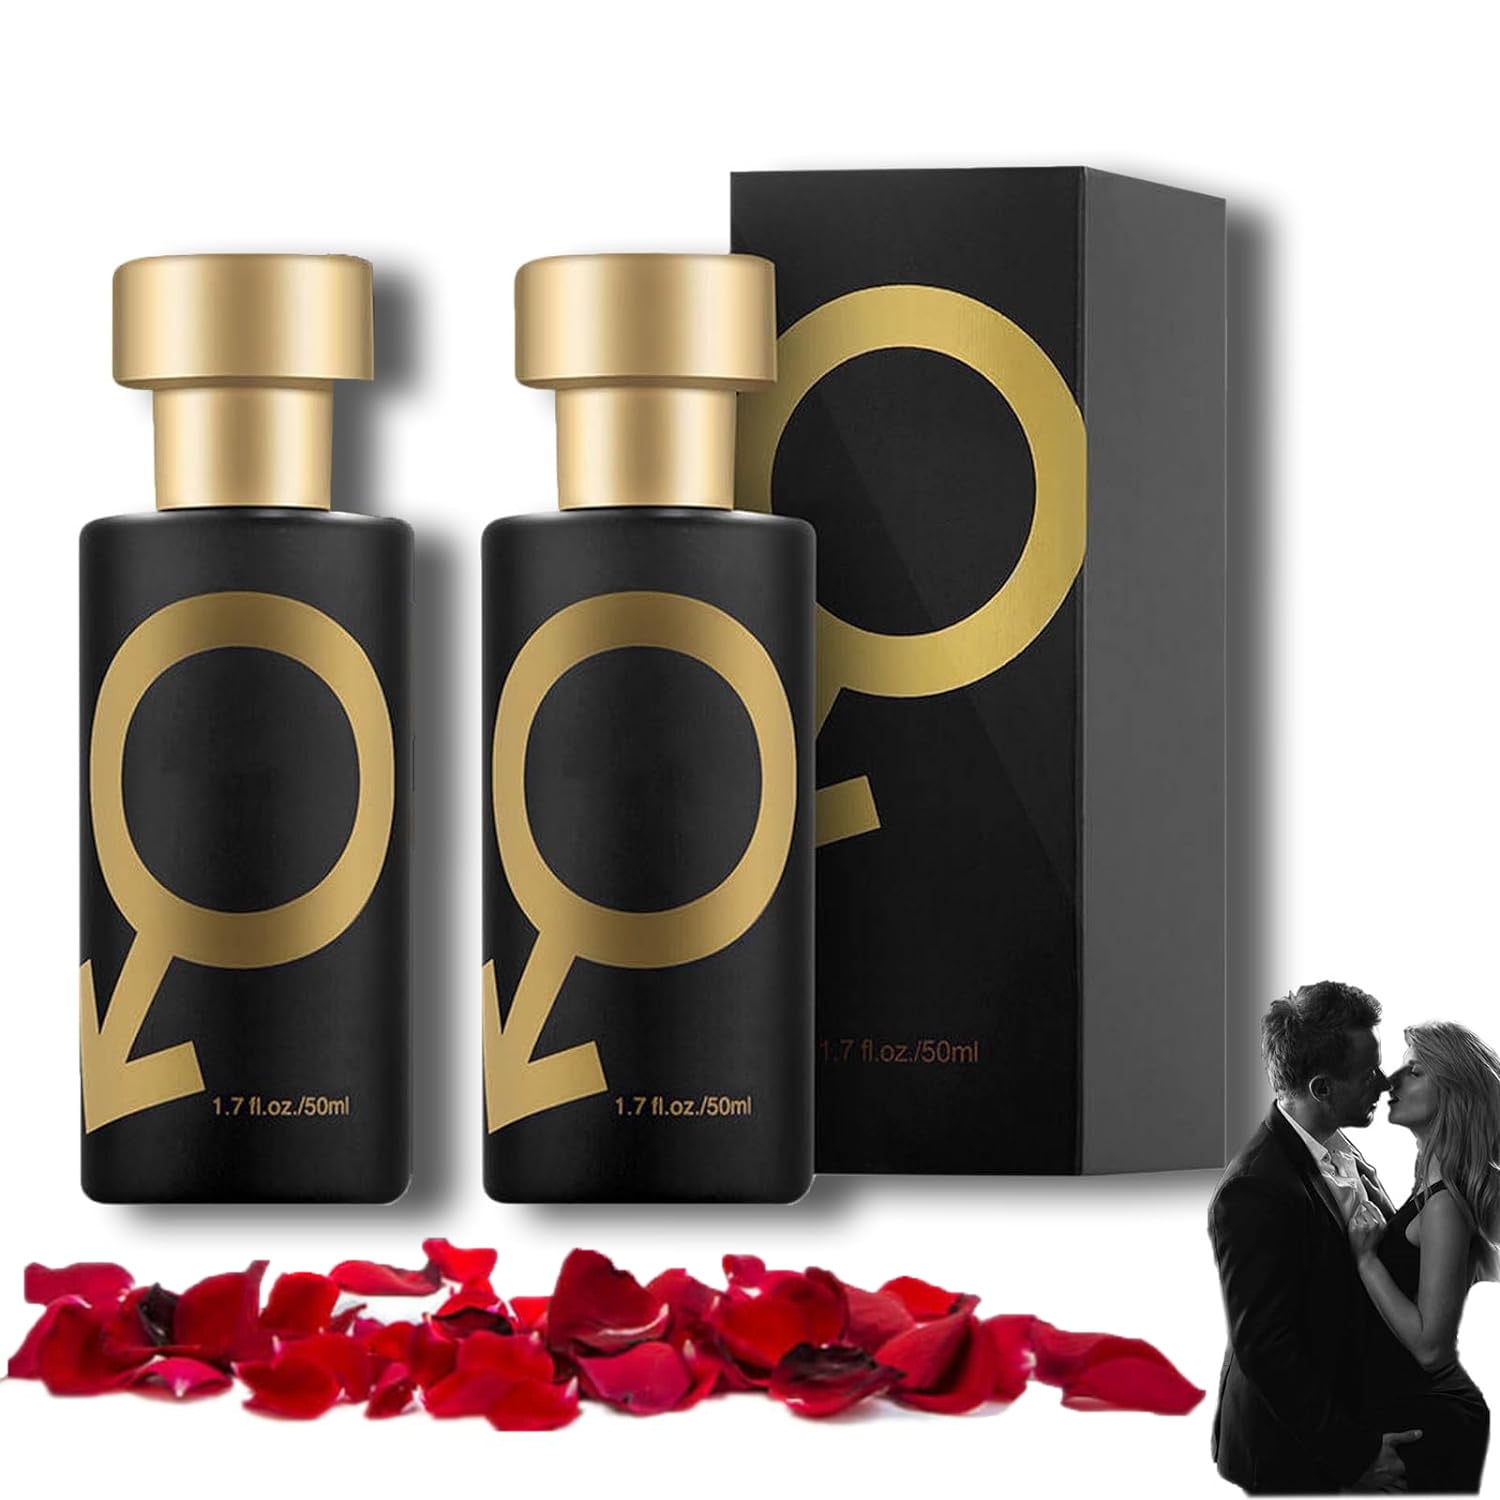 Rdeuod Cupid Hypnosis Cologne for Men, Cupid Fragrances for Men, Cupids ...